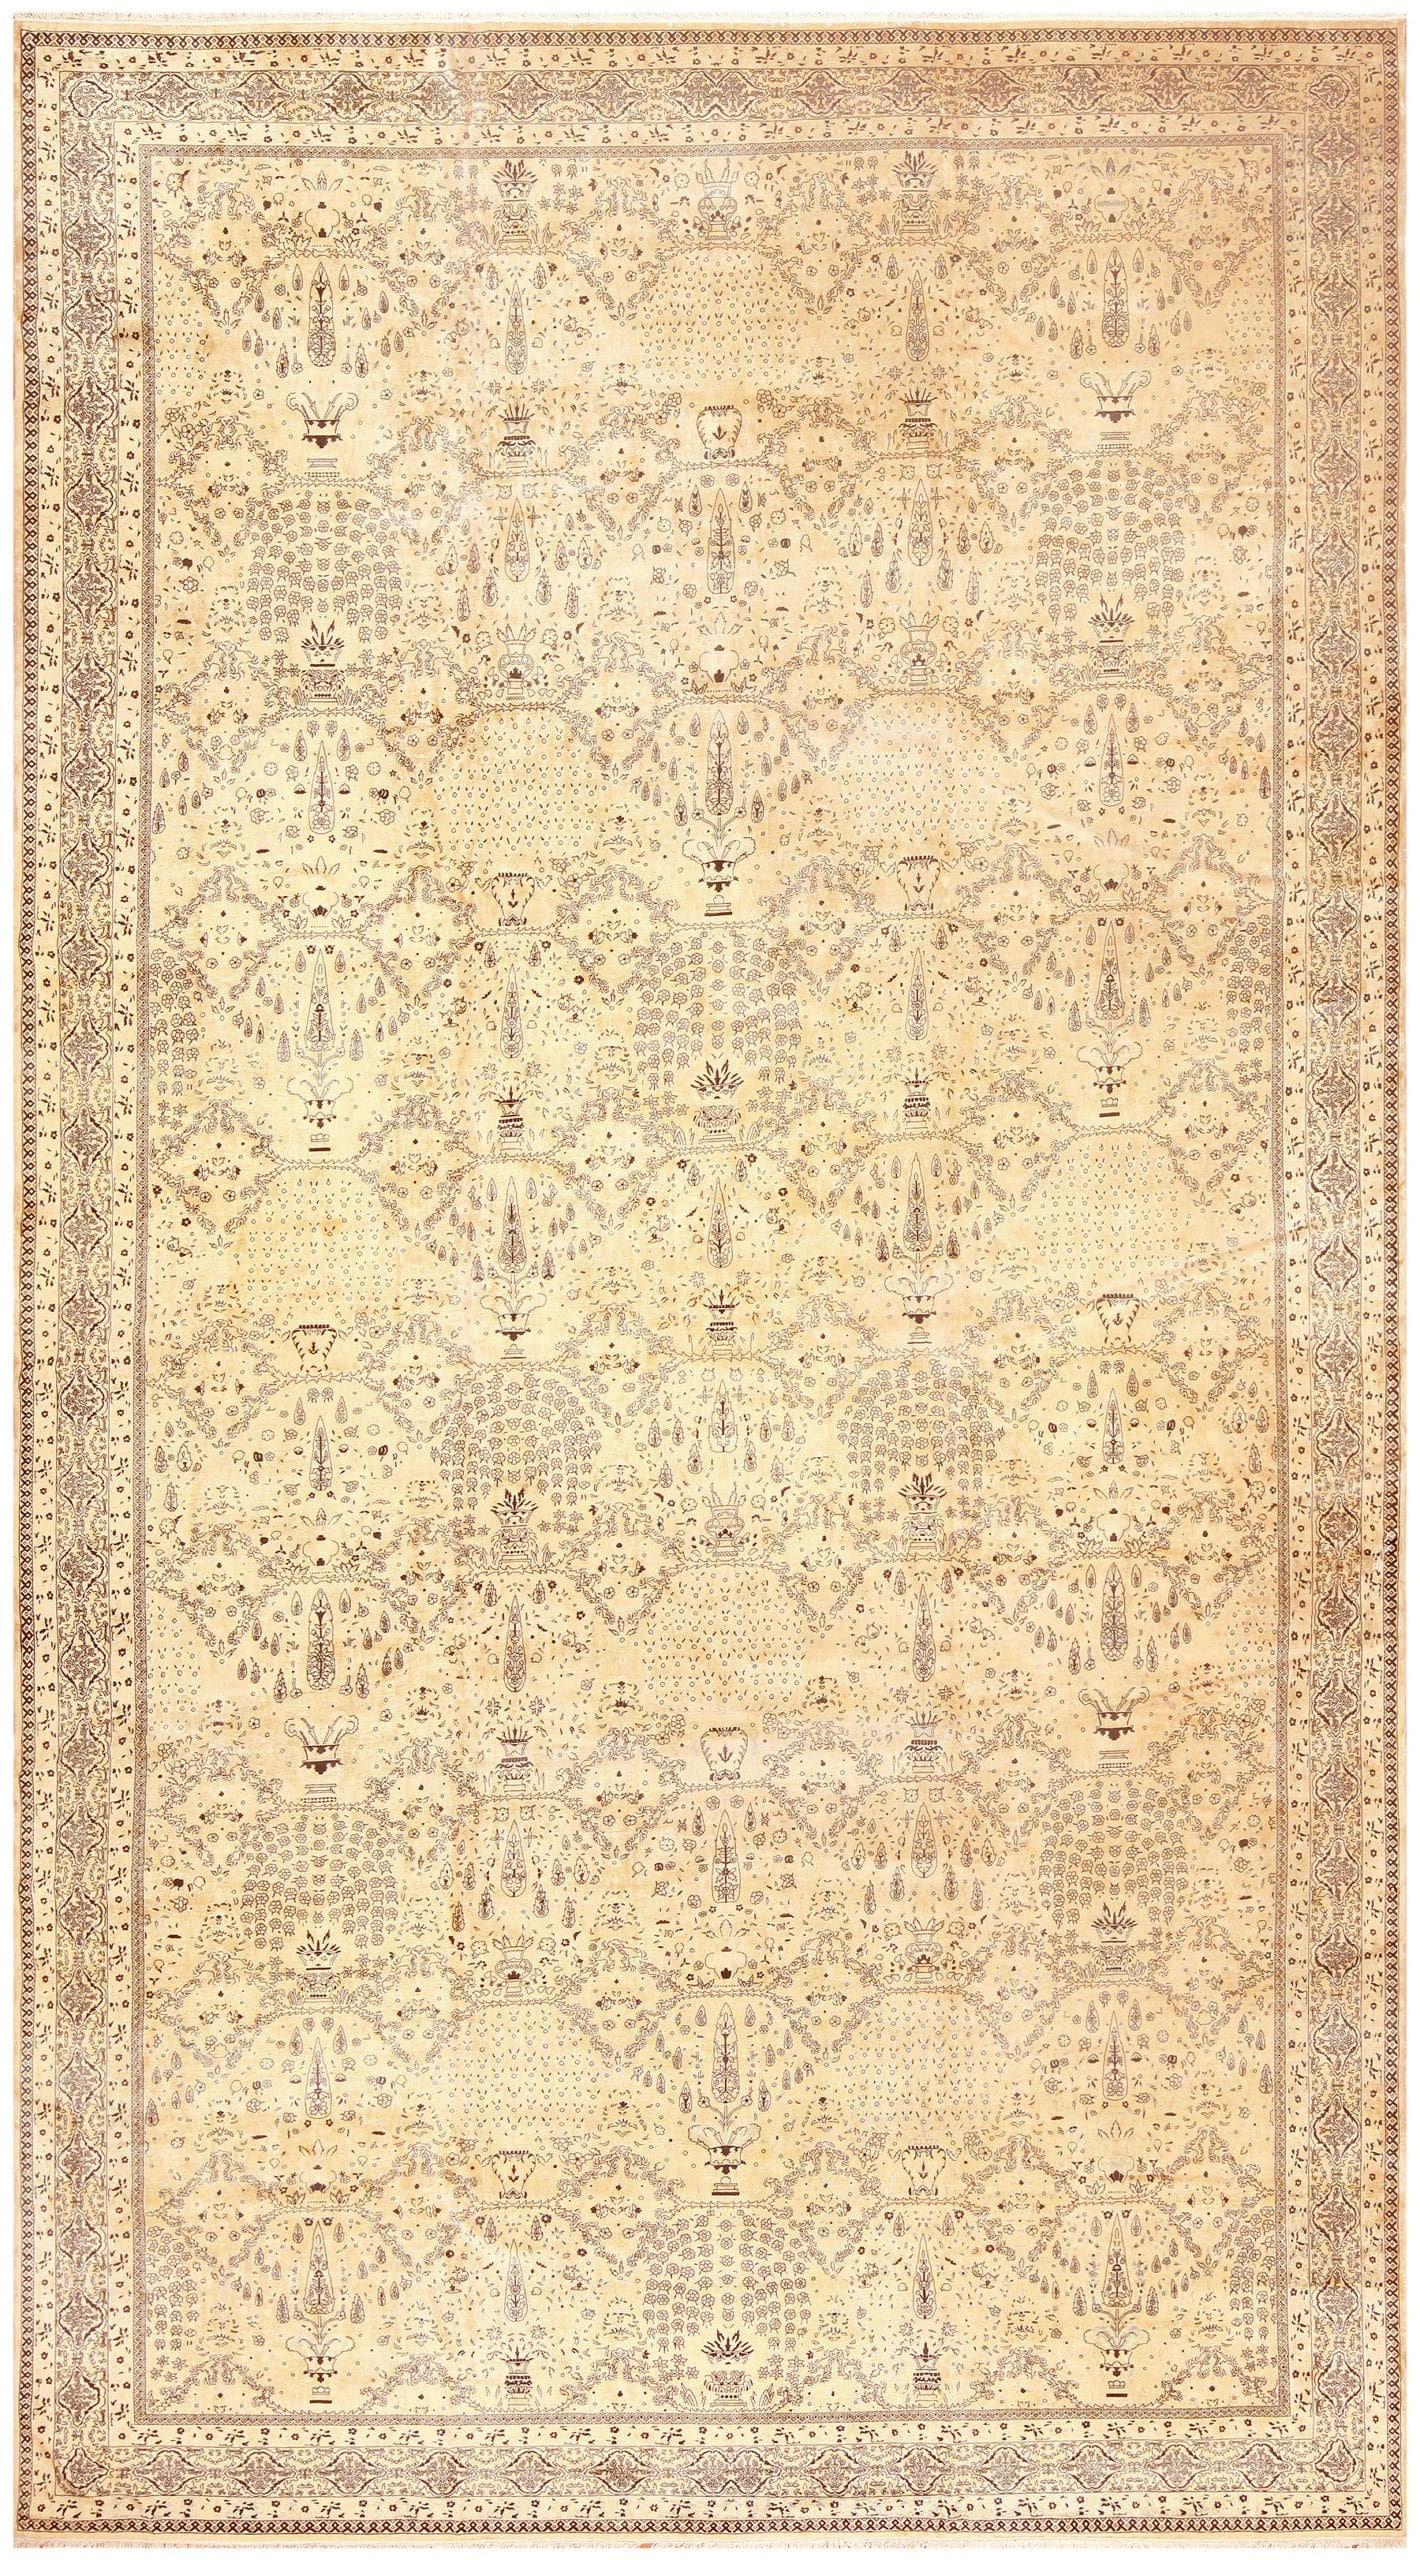 Extra Large Oversized Antique Agra Rug, Country of Origin: India, Circa Date: 1920. Size: 16 ft x 29 ft 6 in (4.88 m x 8.99 m)

 